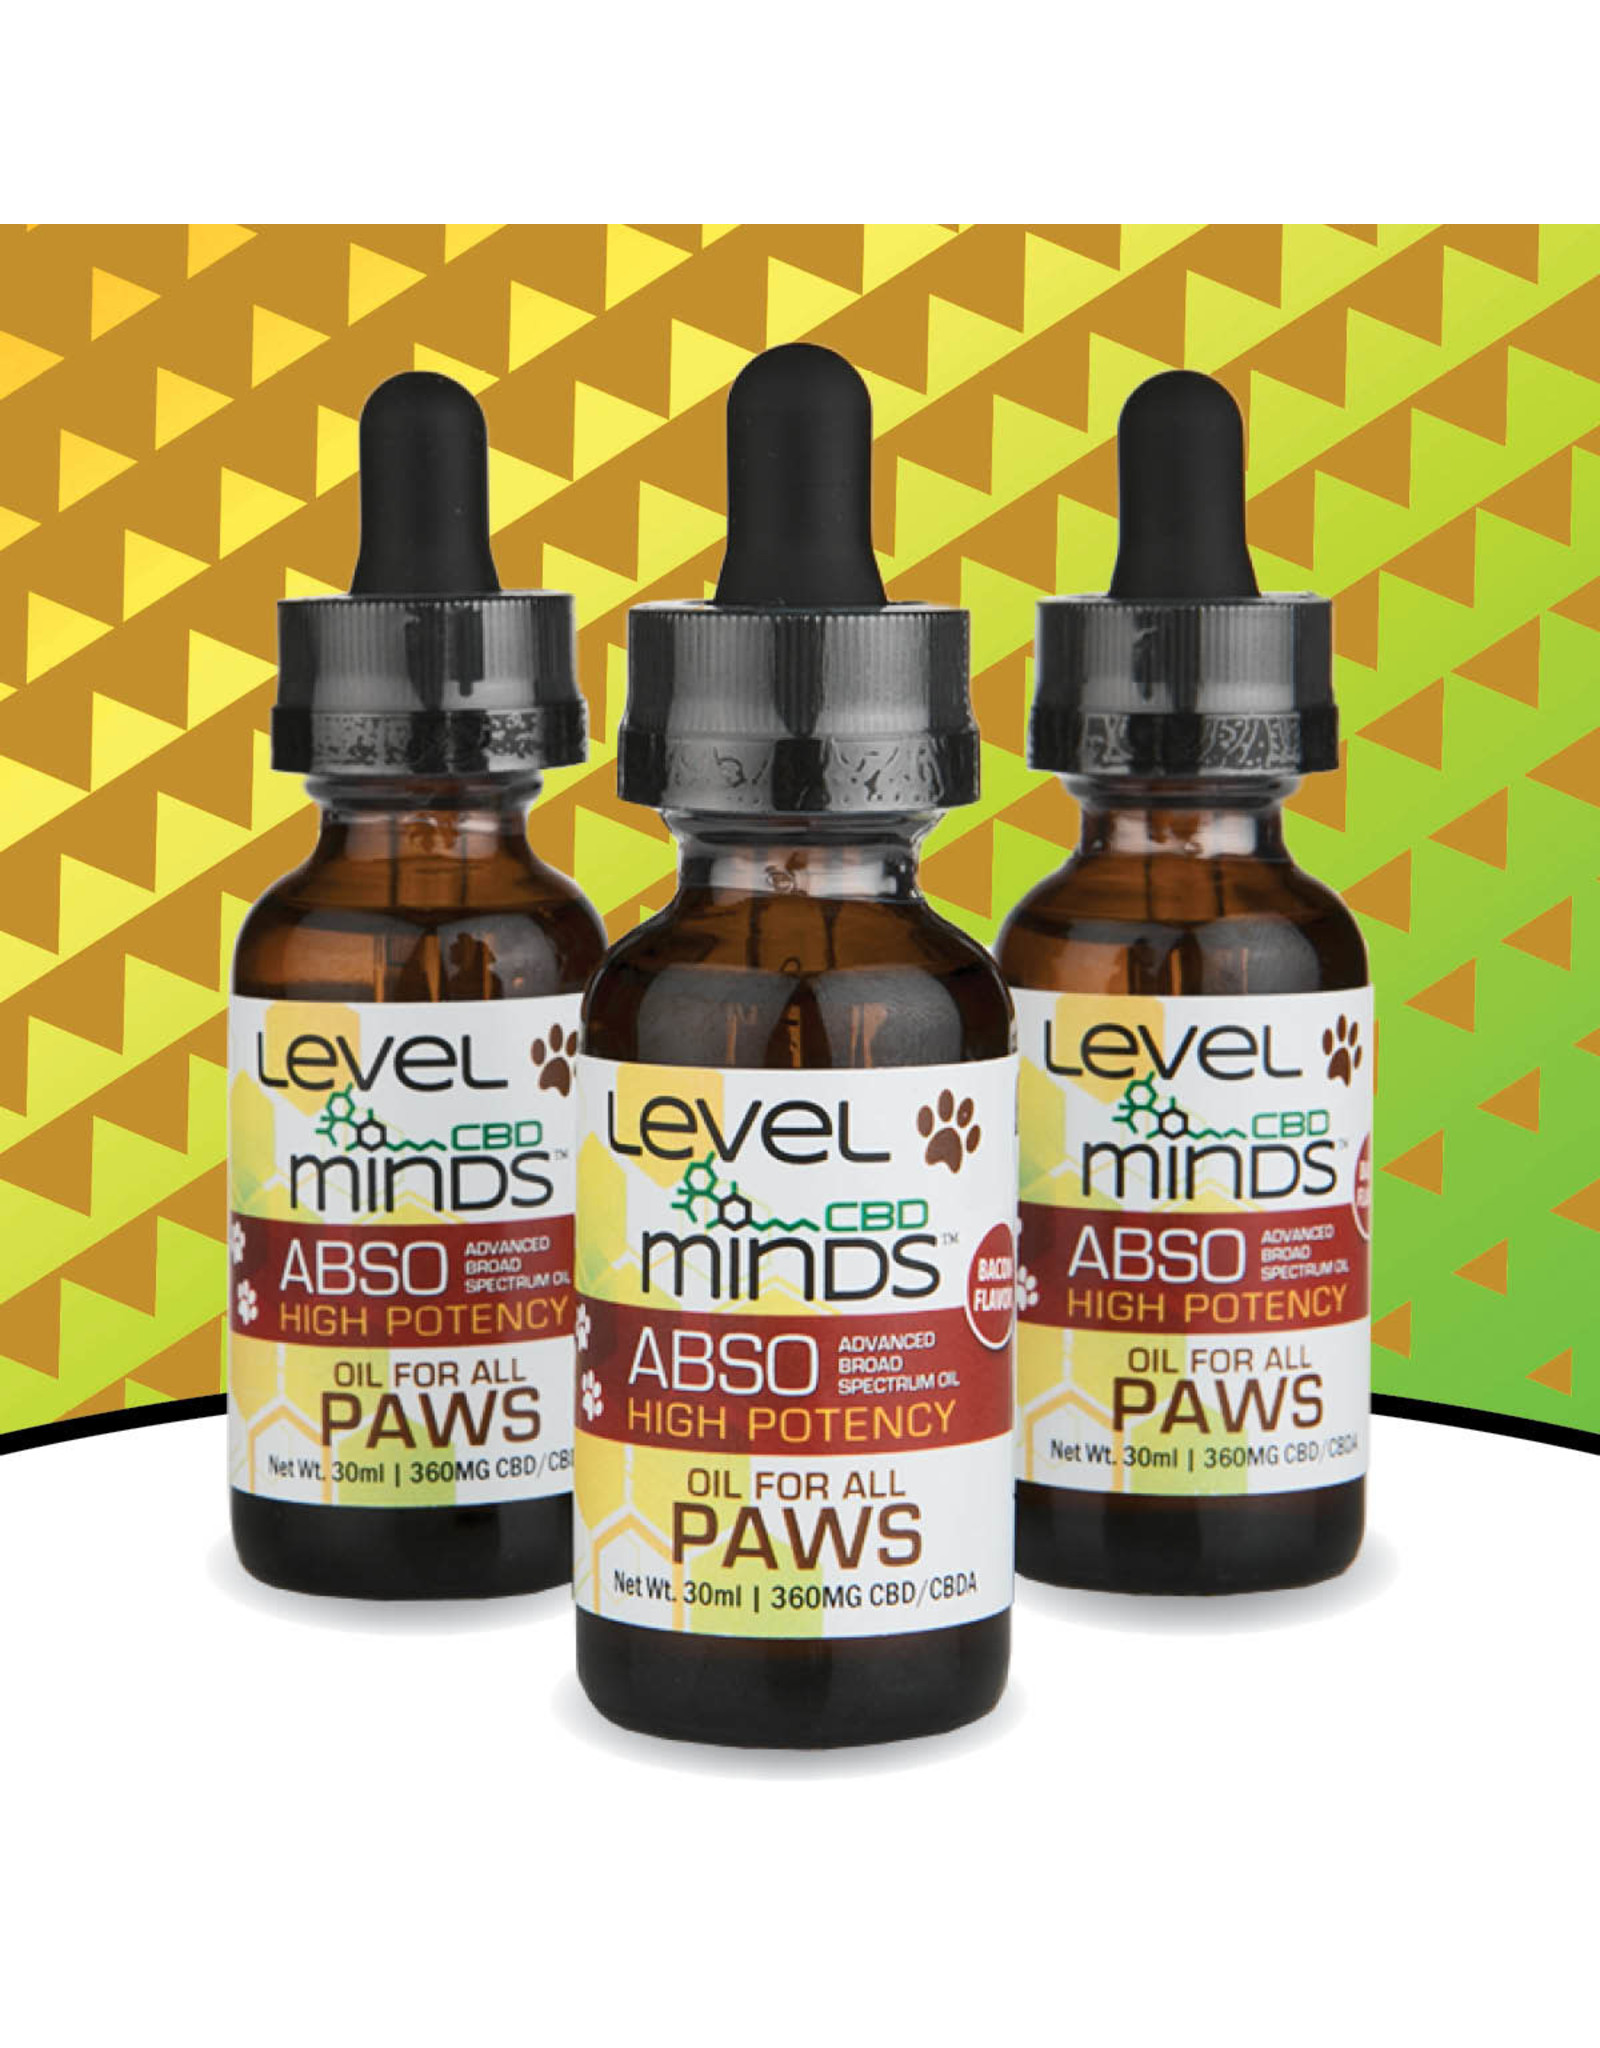 Level Minds Level Minds ABSO Oil For all Paws 360mg 30ml